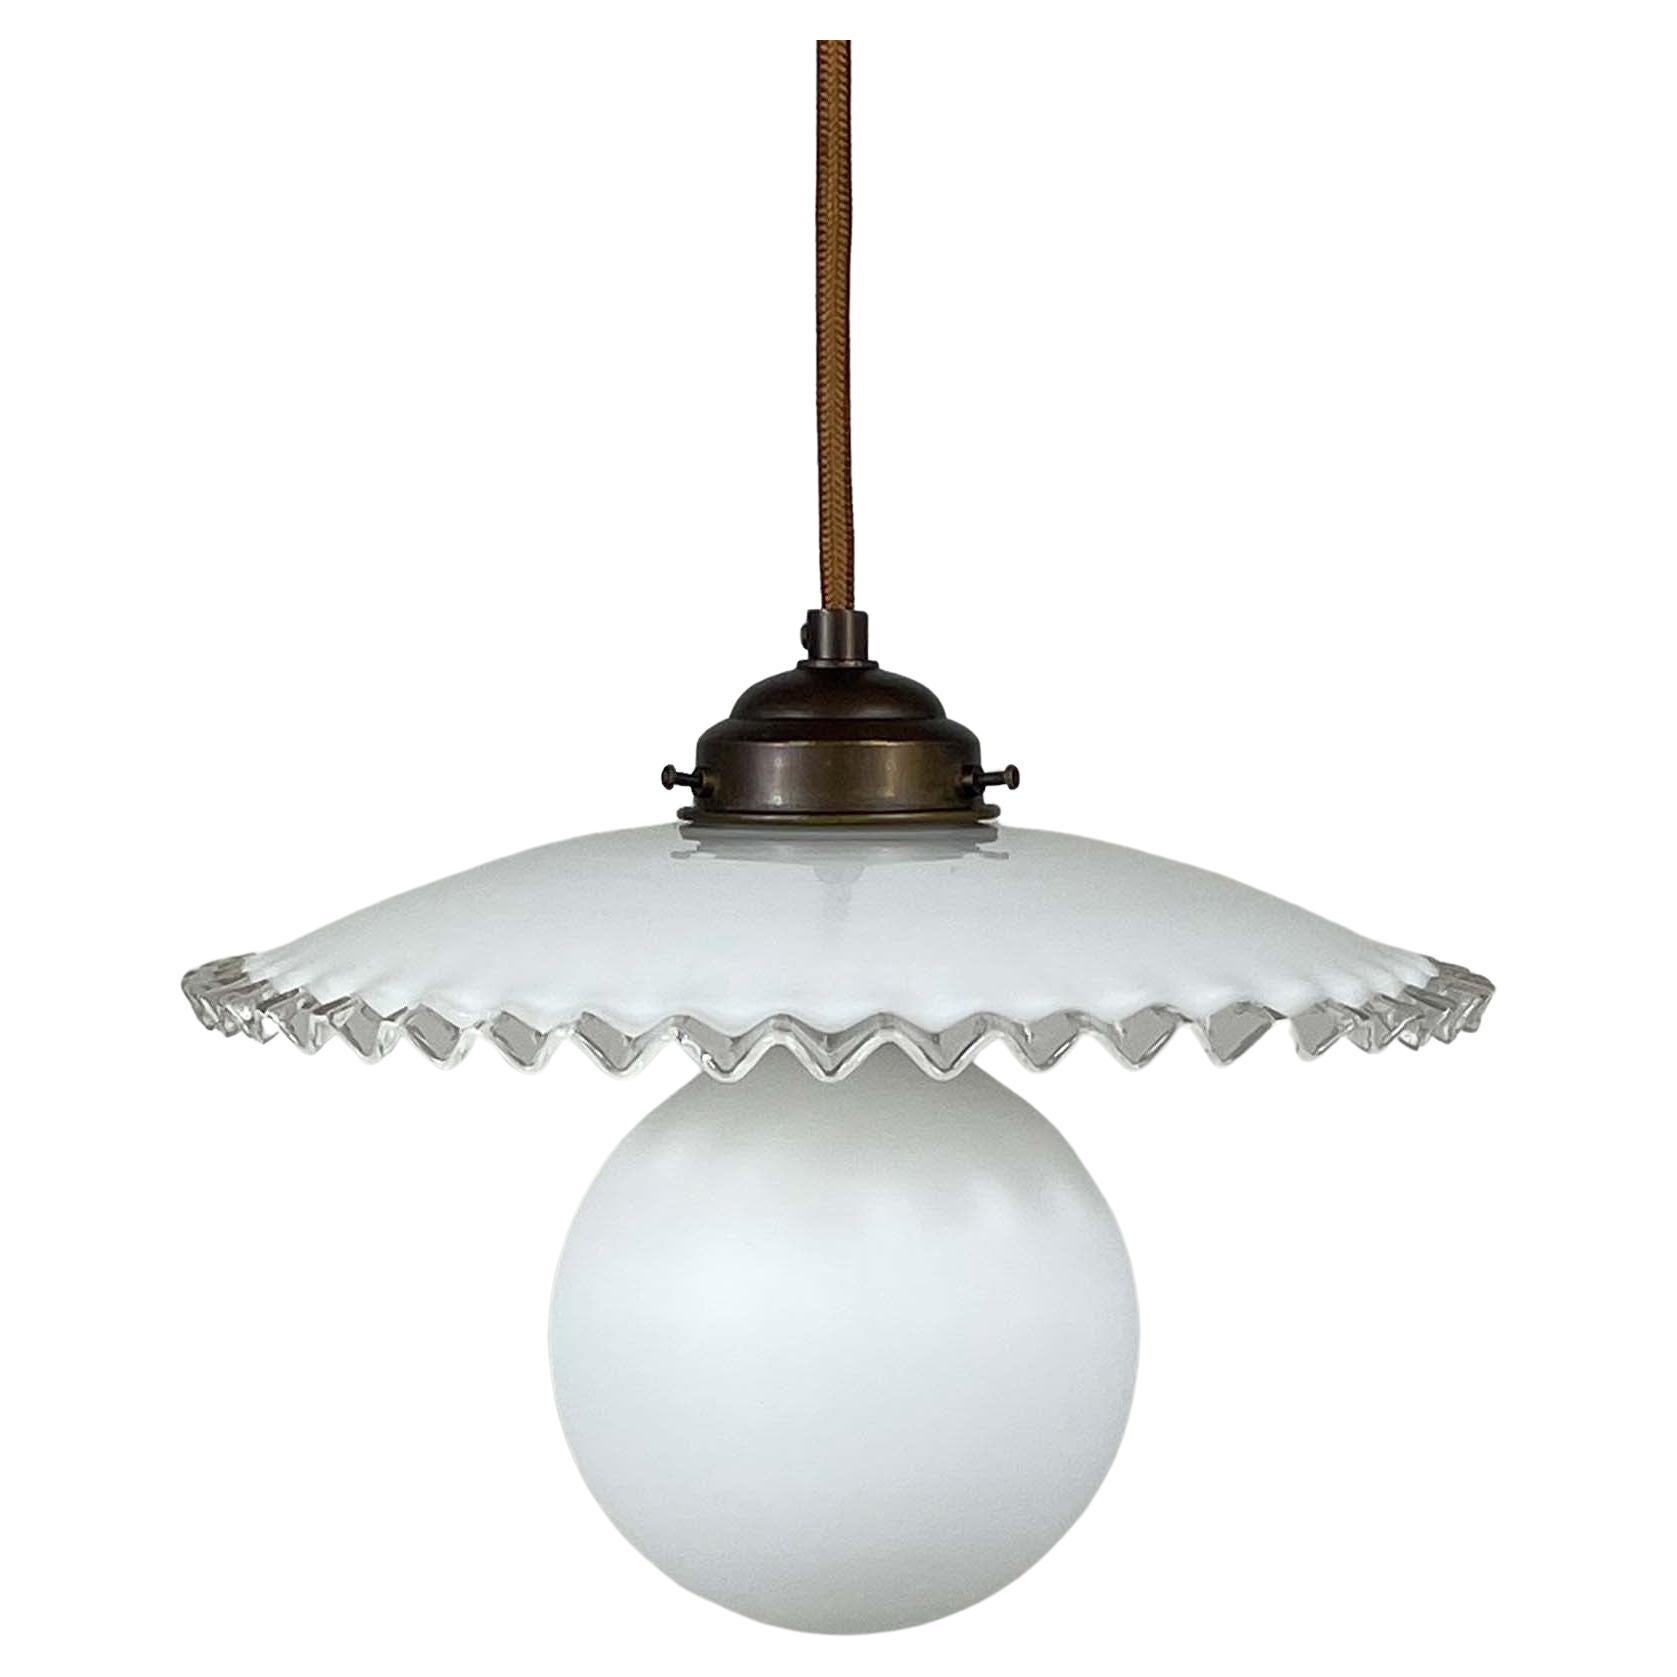 Midcentury French Opaline Glass Pendant Light, 1950s For Sale